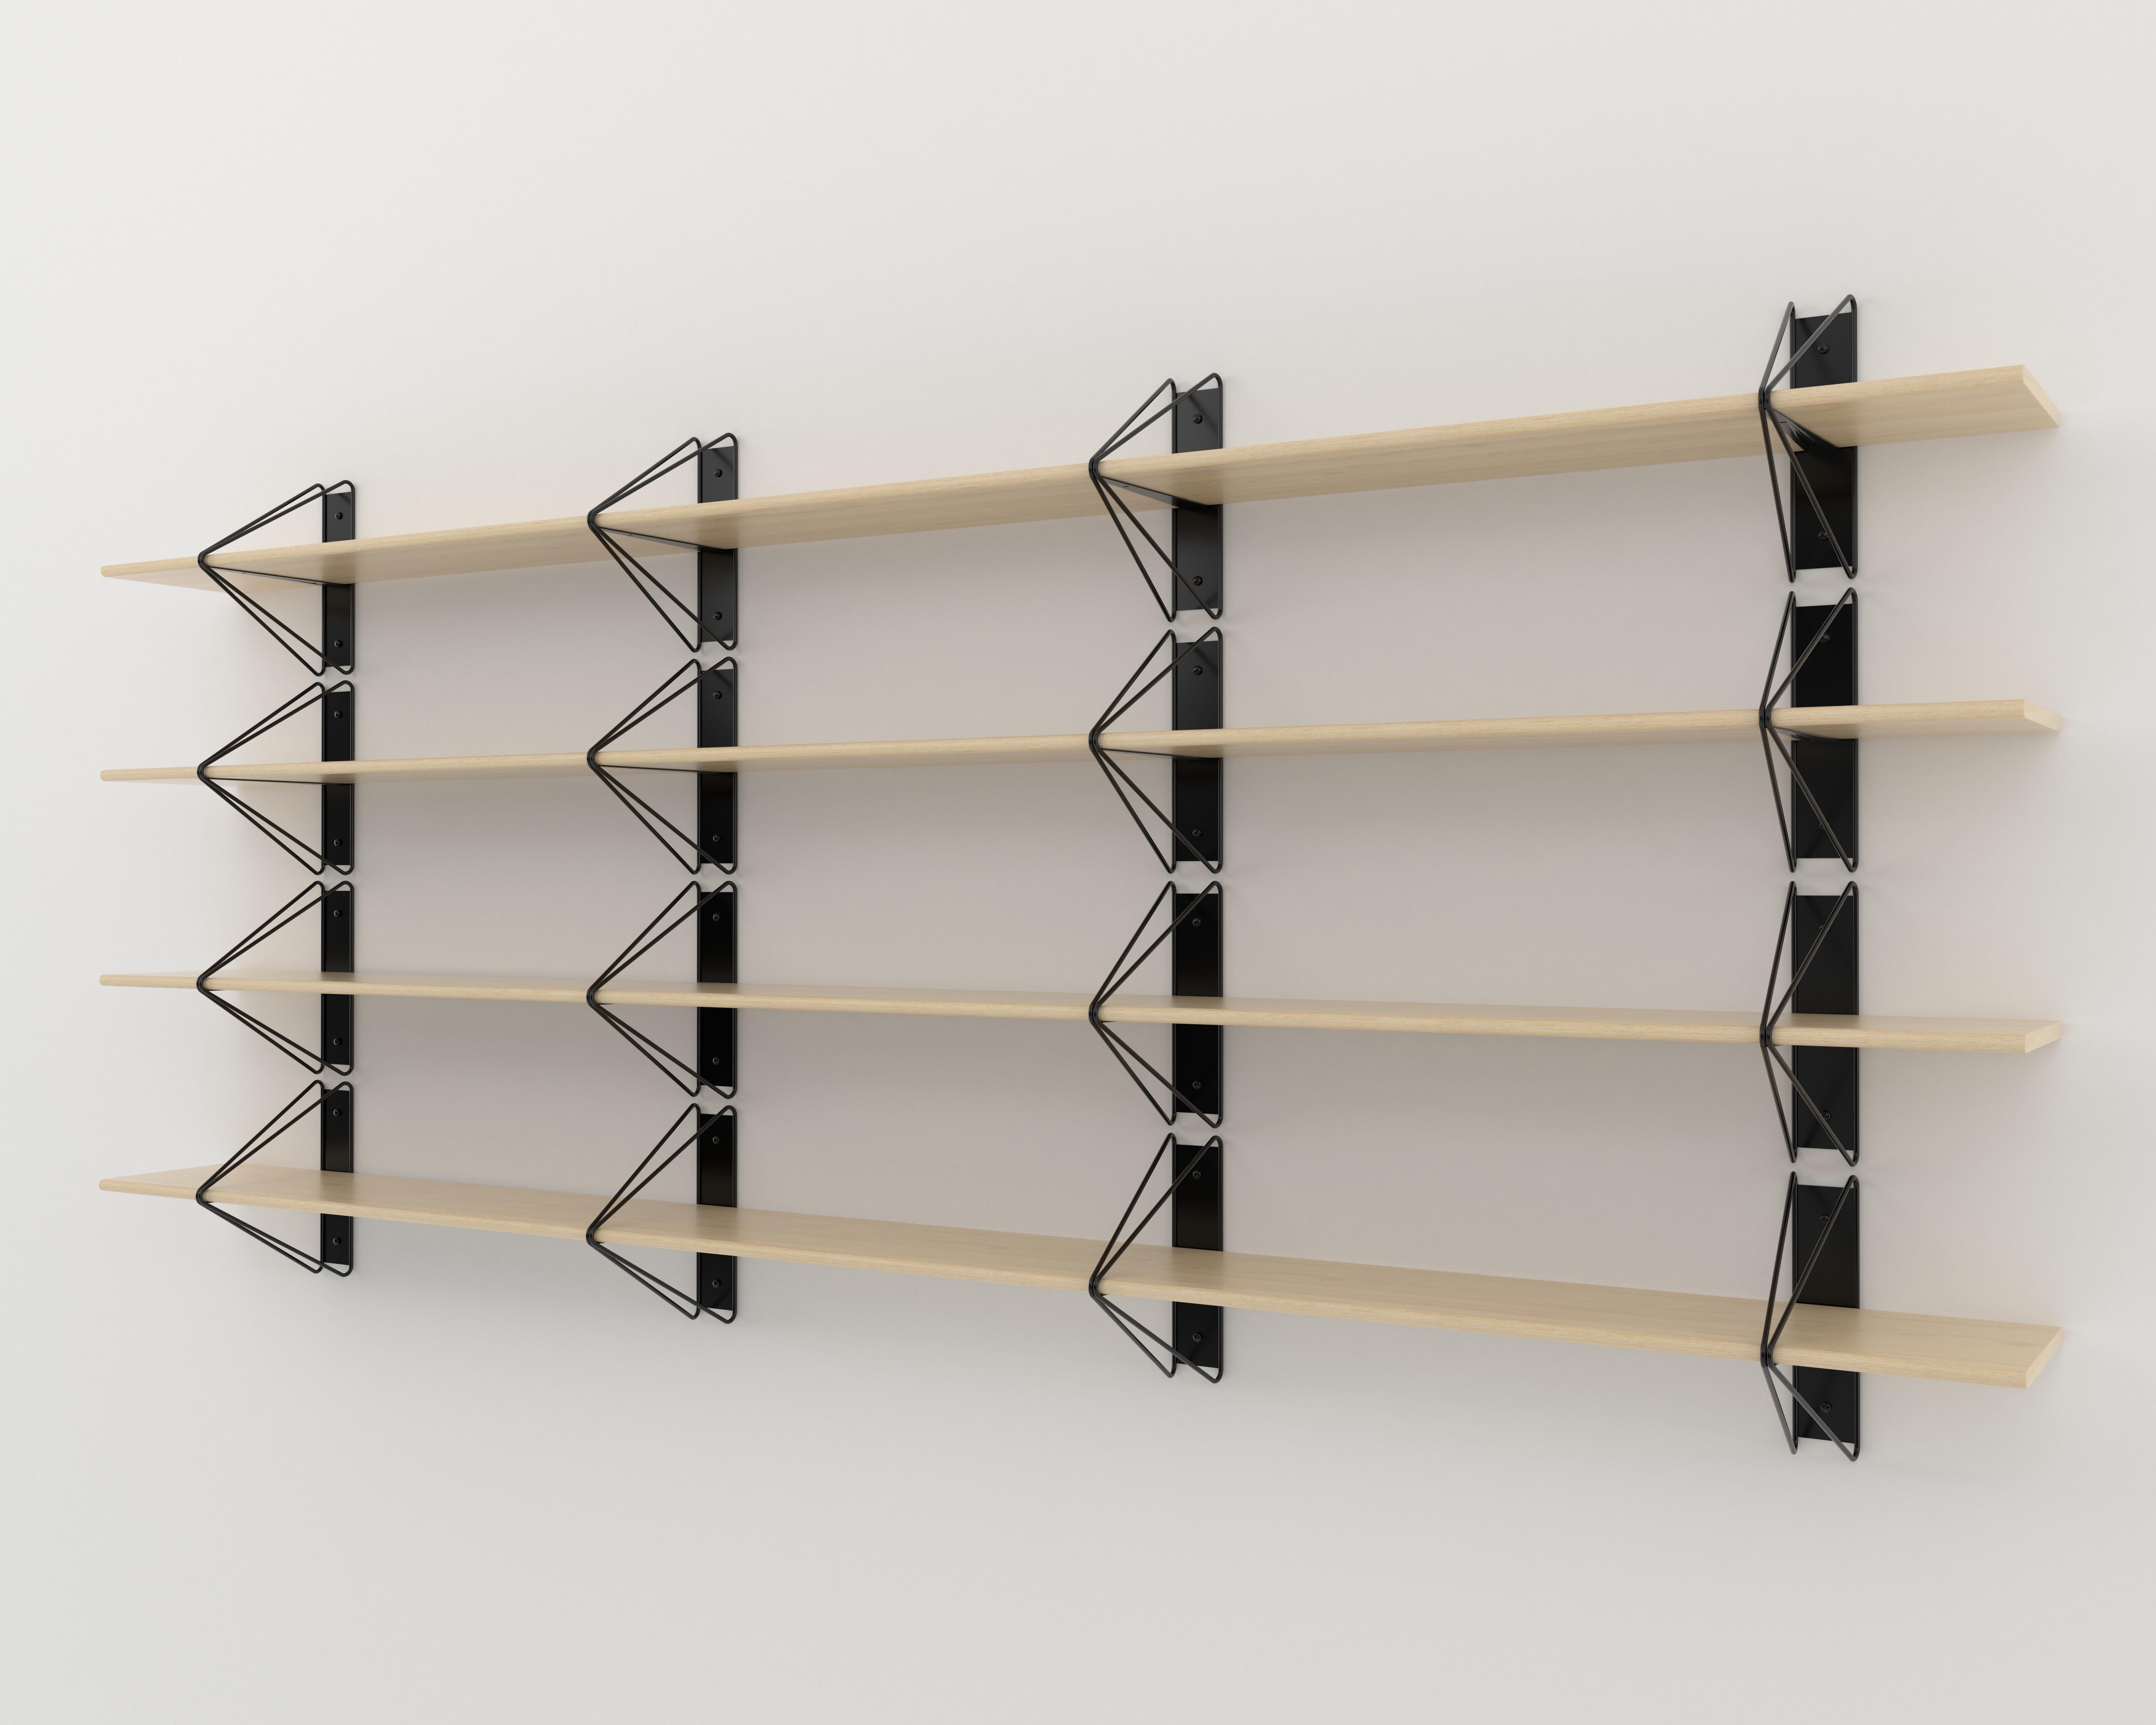 Metal Set of 5 Strut Shelves from Souda, Black and Walnut, Made to Order For Sale